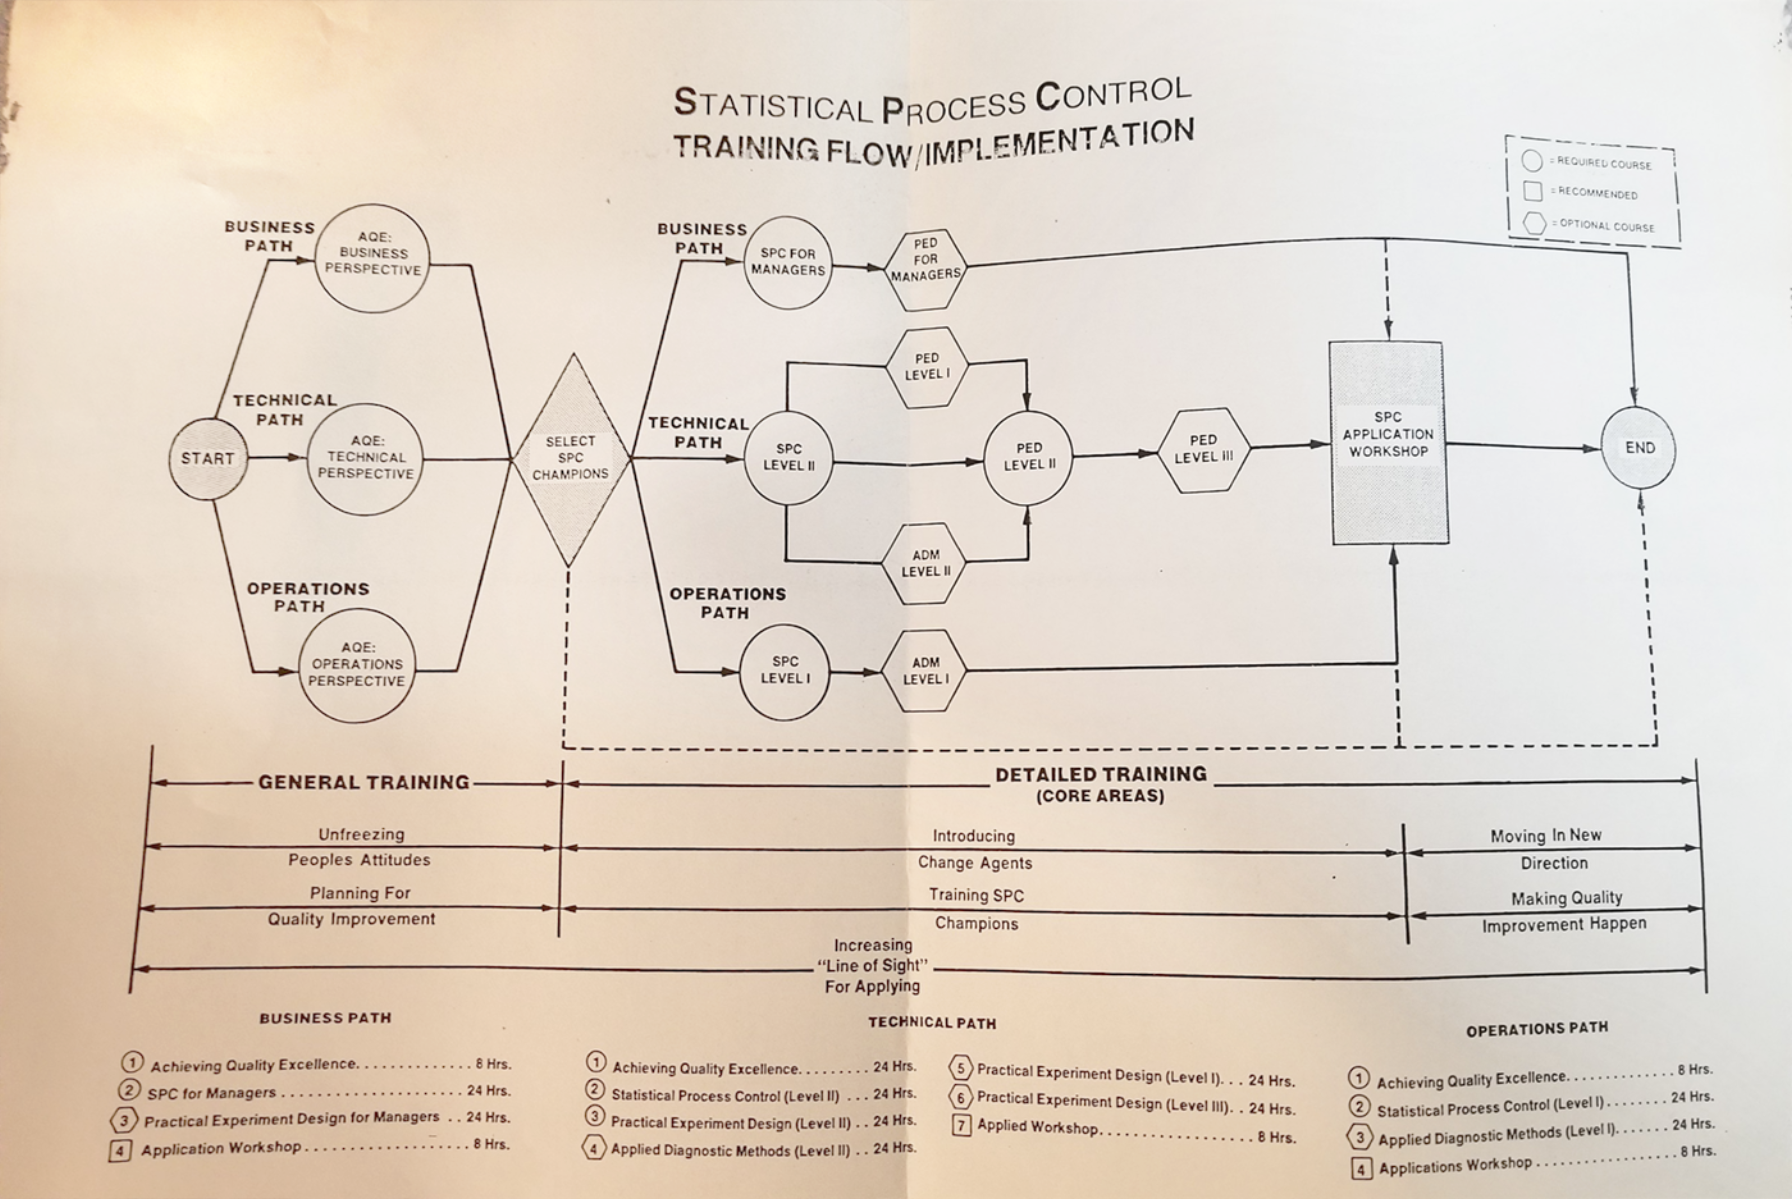 Old paper chart showing a statistical process control flow diagram